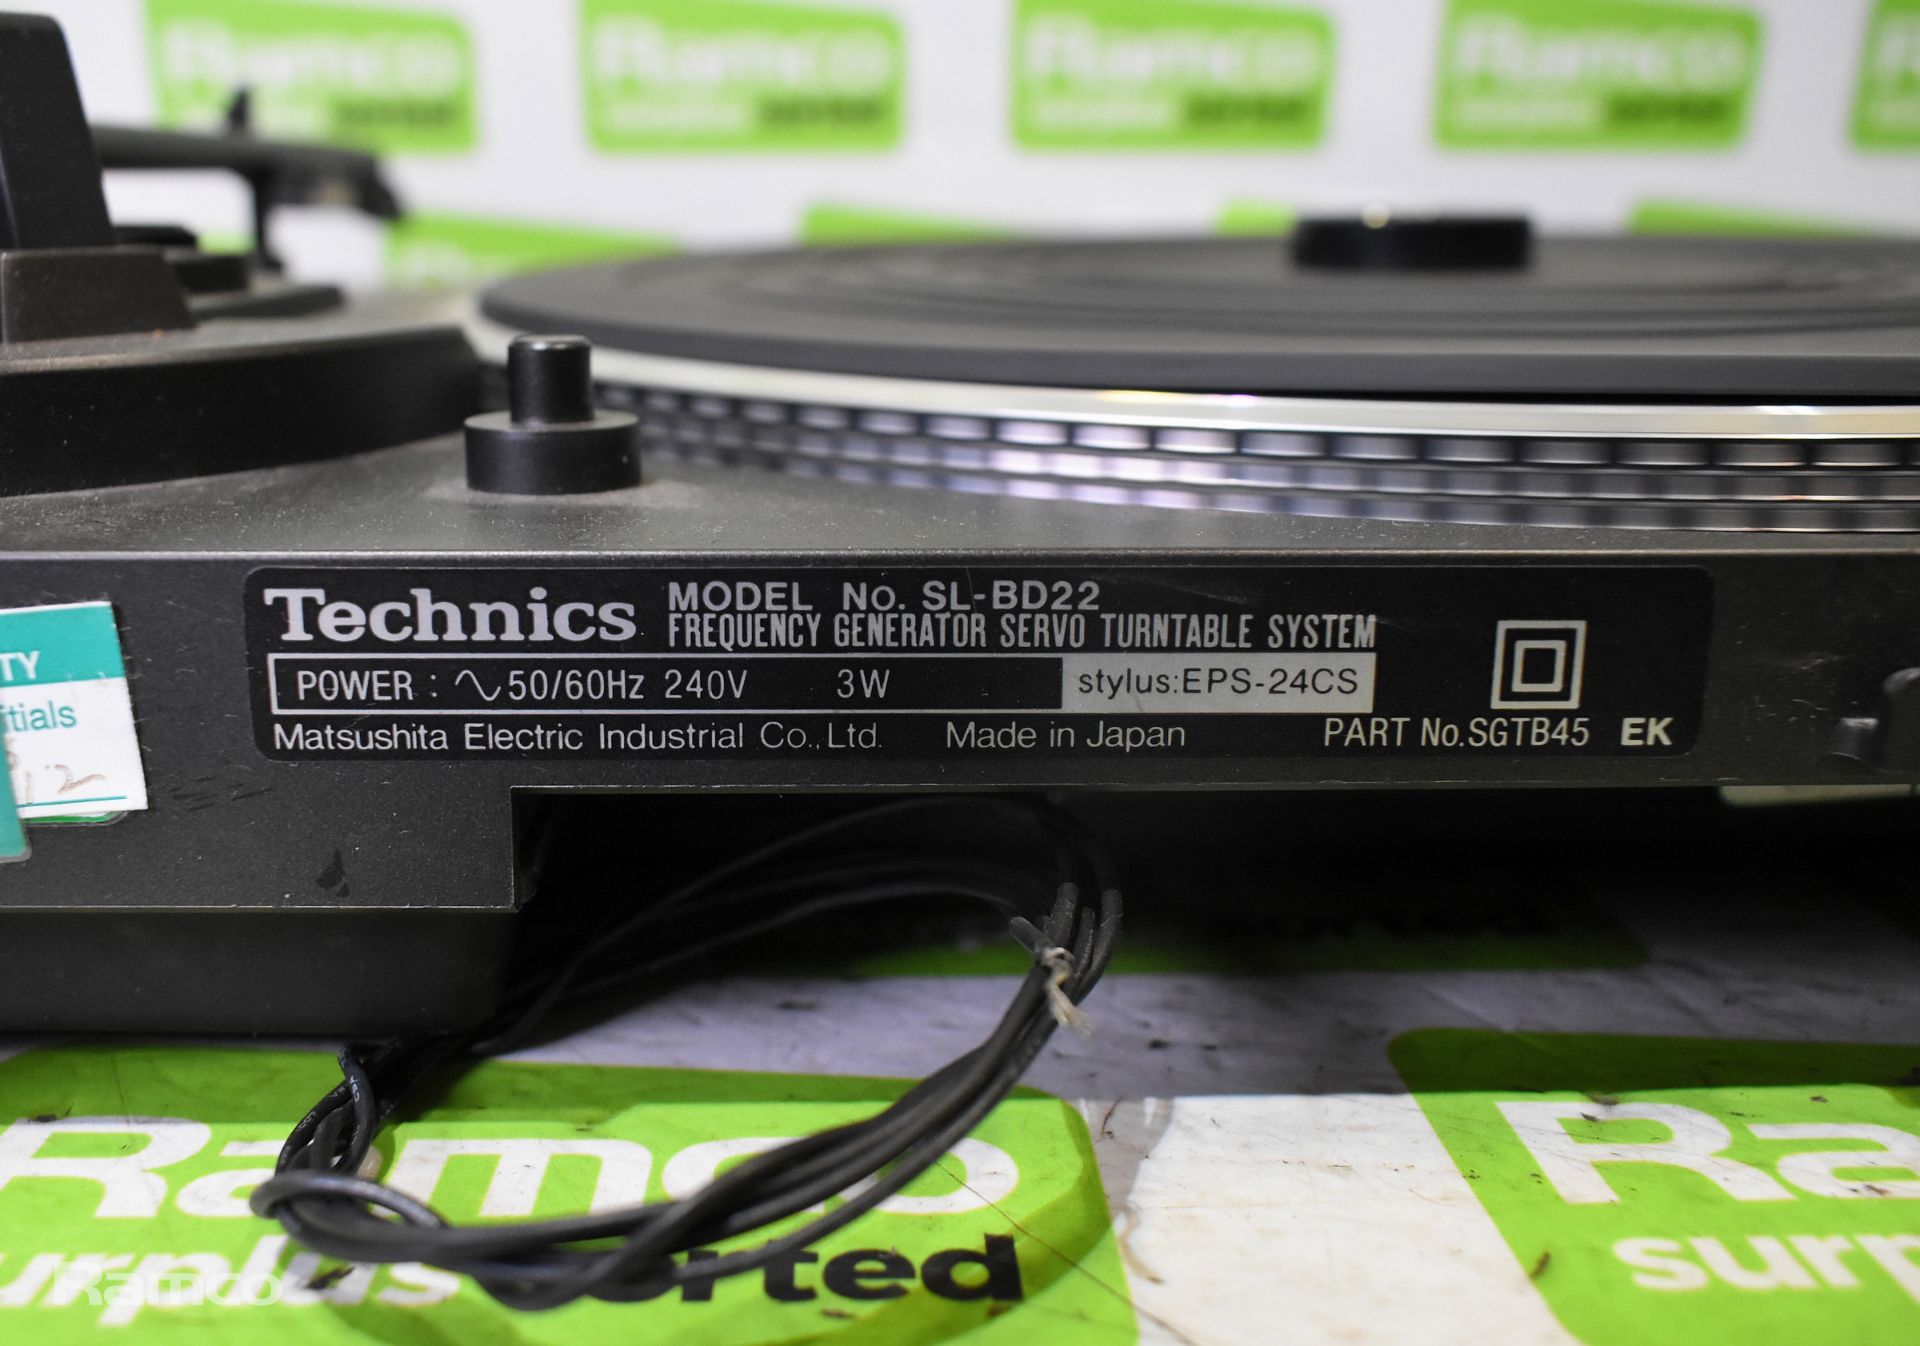 Technics SL-BD22 Automatic turntable system, Technics FG servo SL-BD22 automatic turntable system - Image 12 of 12